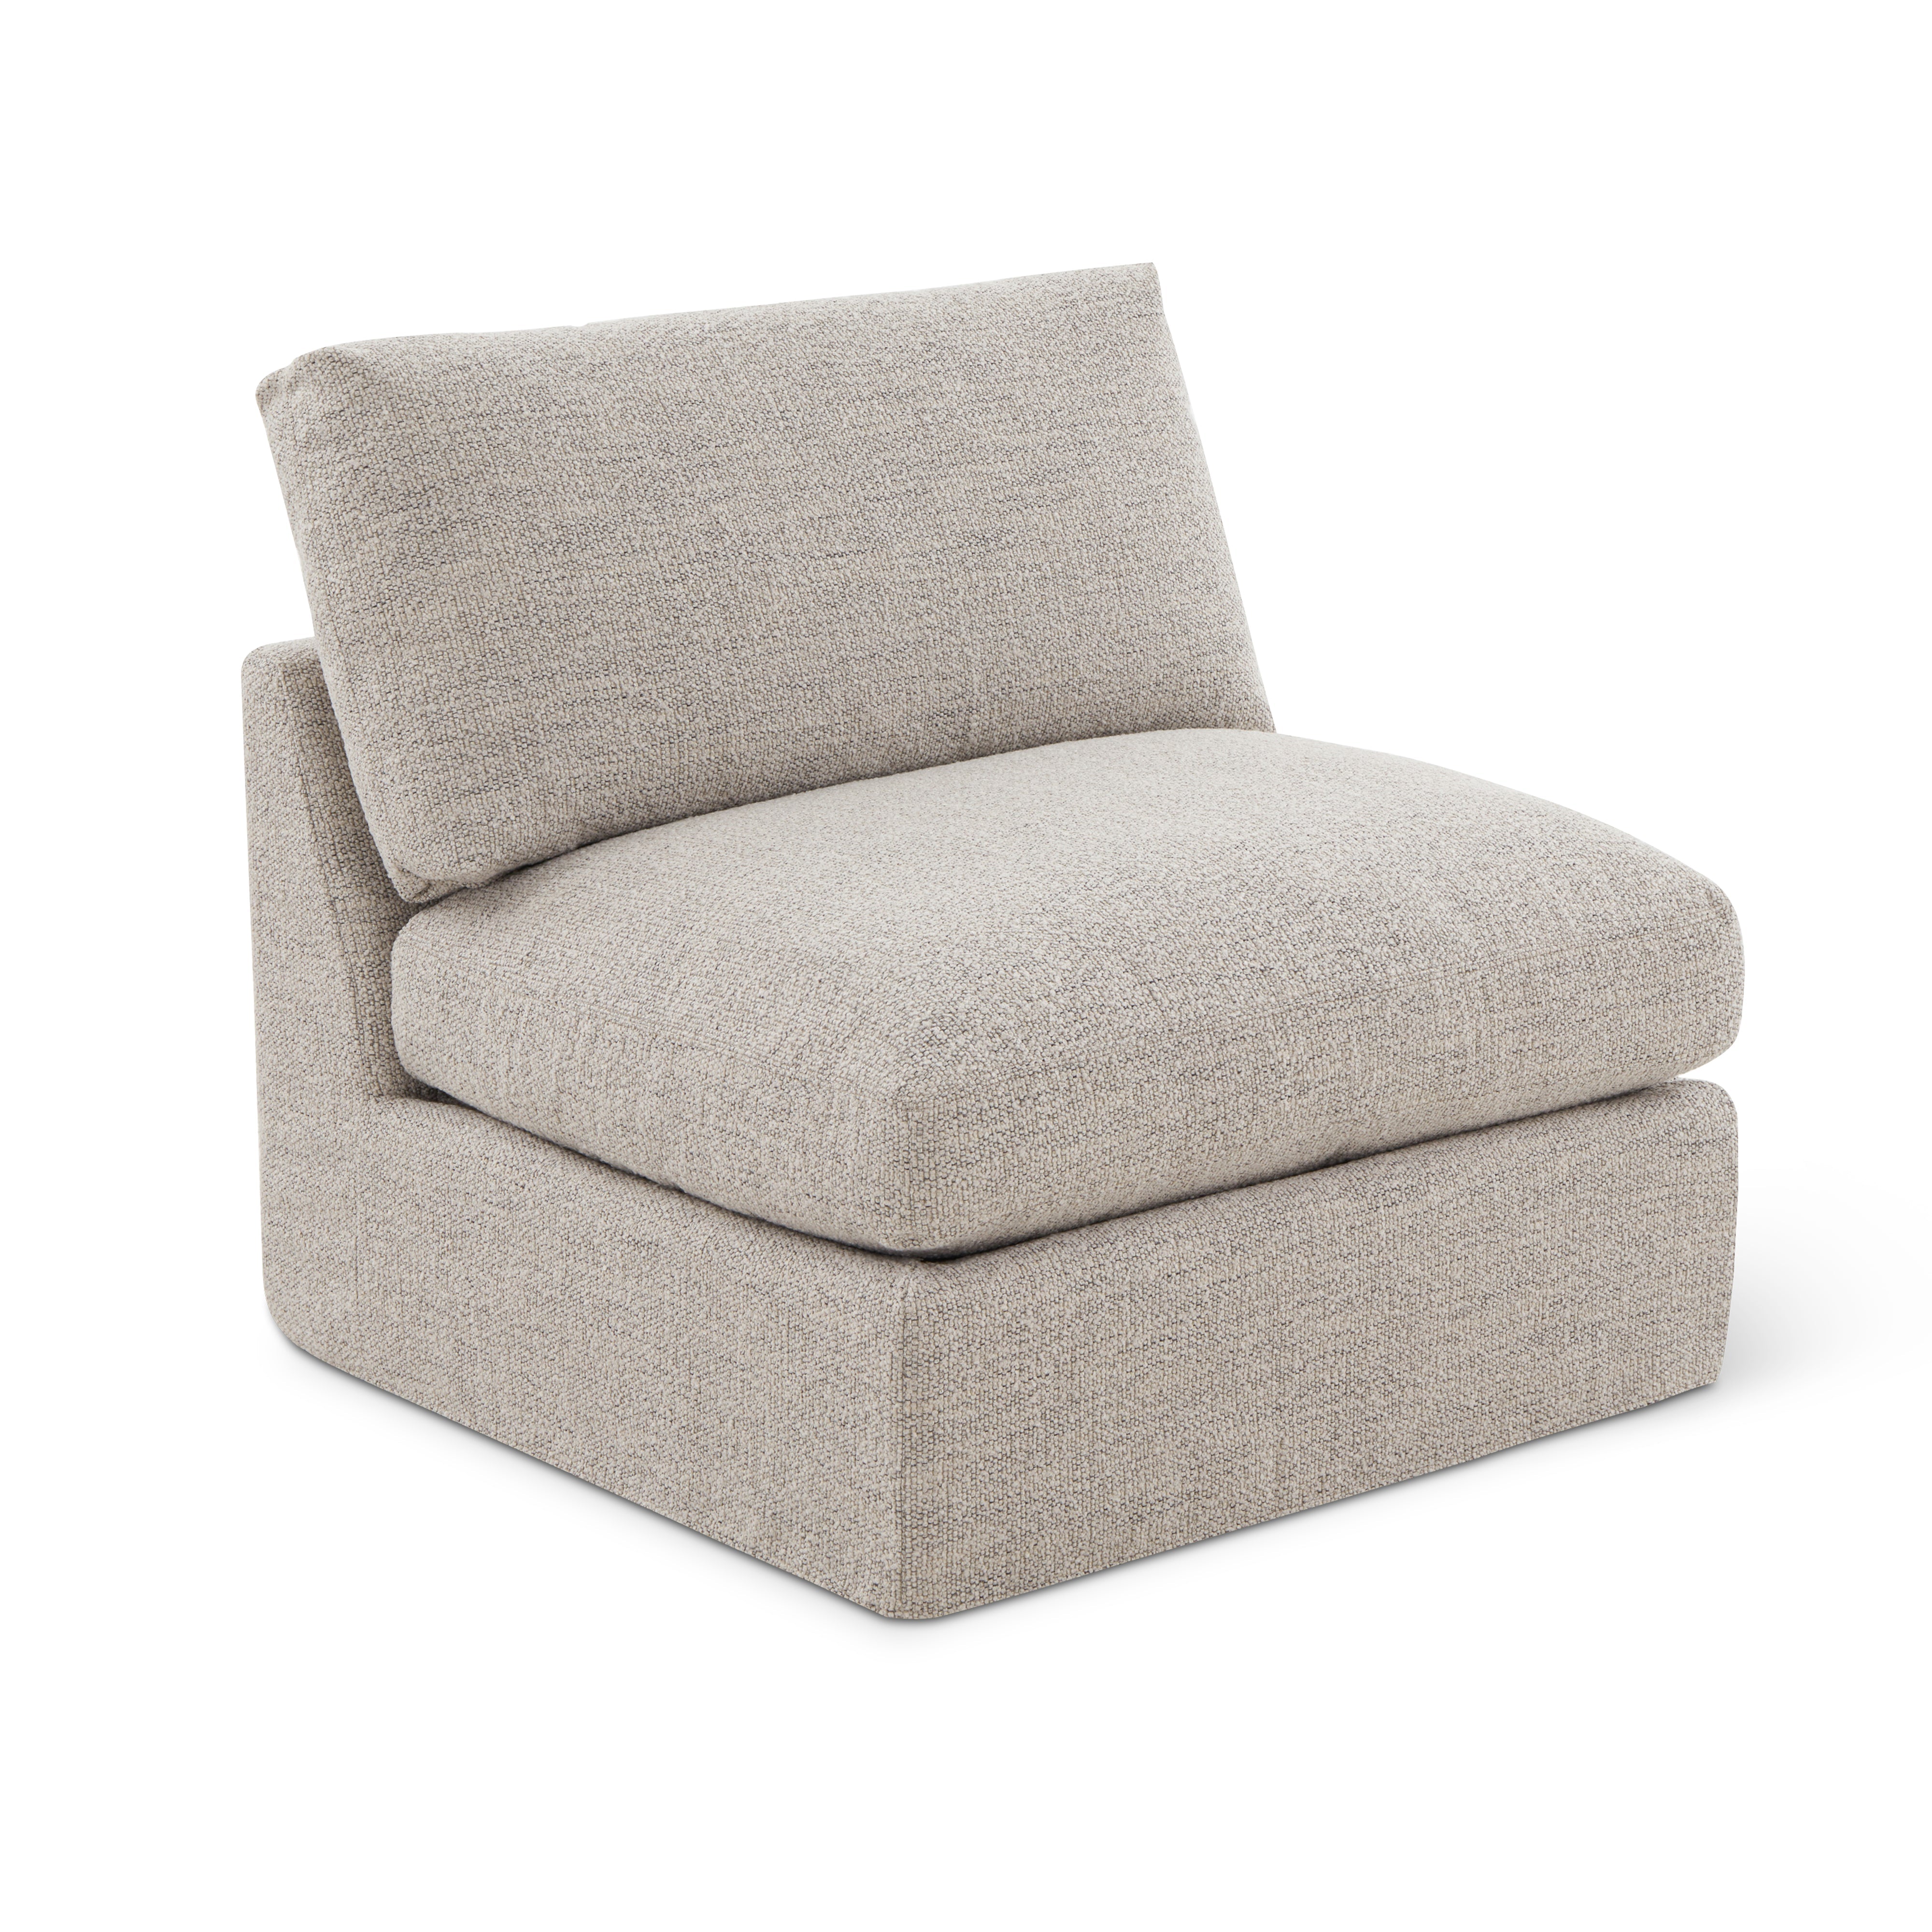 Get Together™ Armless Chair, Standard, Oatmeal - Image 9